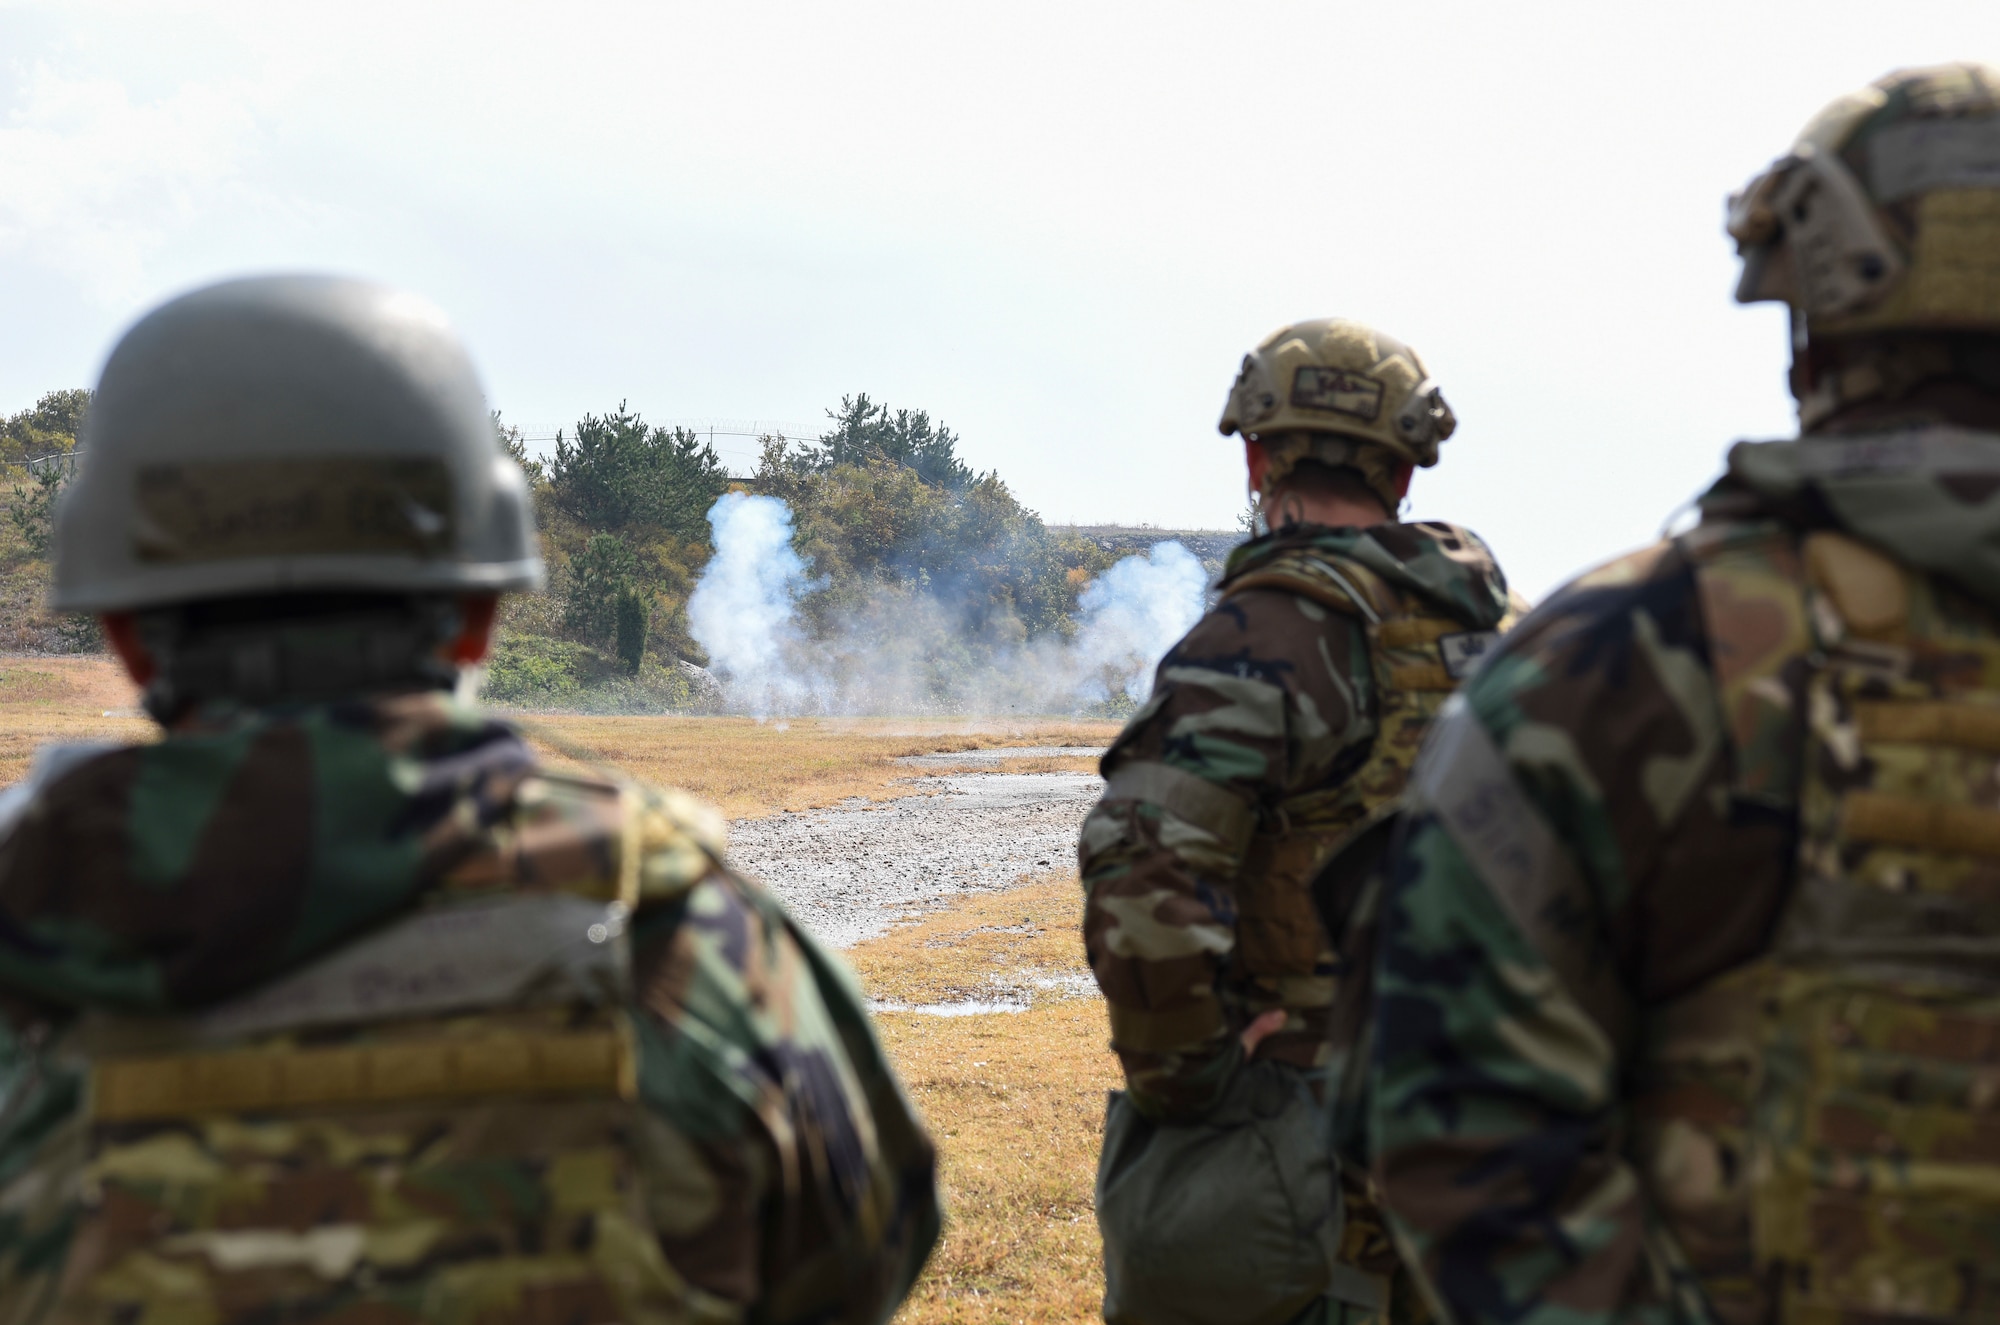 Explosive Ordnance Disposal Airmen from the 8th Civil Engineer Squadron observe training charges detonating at Kunsan Air Base, Republic of Korea, Oct. 29, 2018. EOD members are trained to detect, disarm, detonate and dispose of explosives, routine practice scenarios such as this, help the team improve safety, speed, and efficiency while also reinforcing readiness. (U.S. Air Force photo by Senior Airman Savannah Waters)